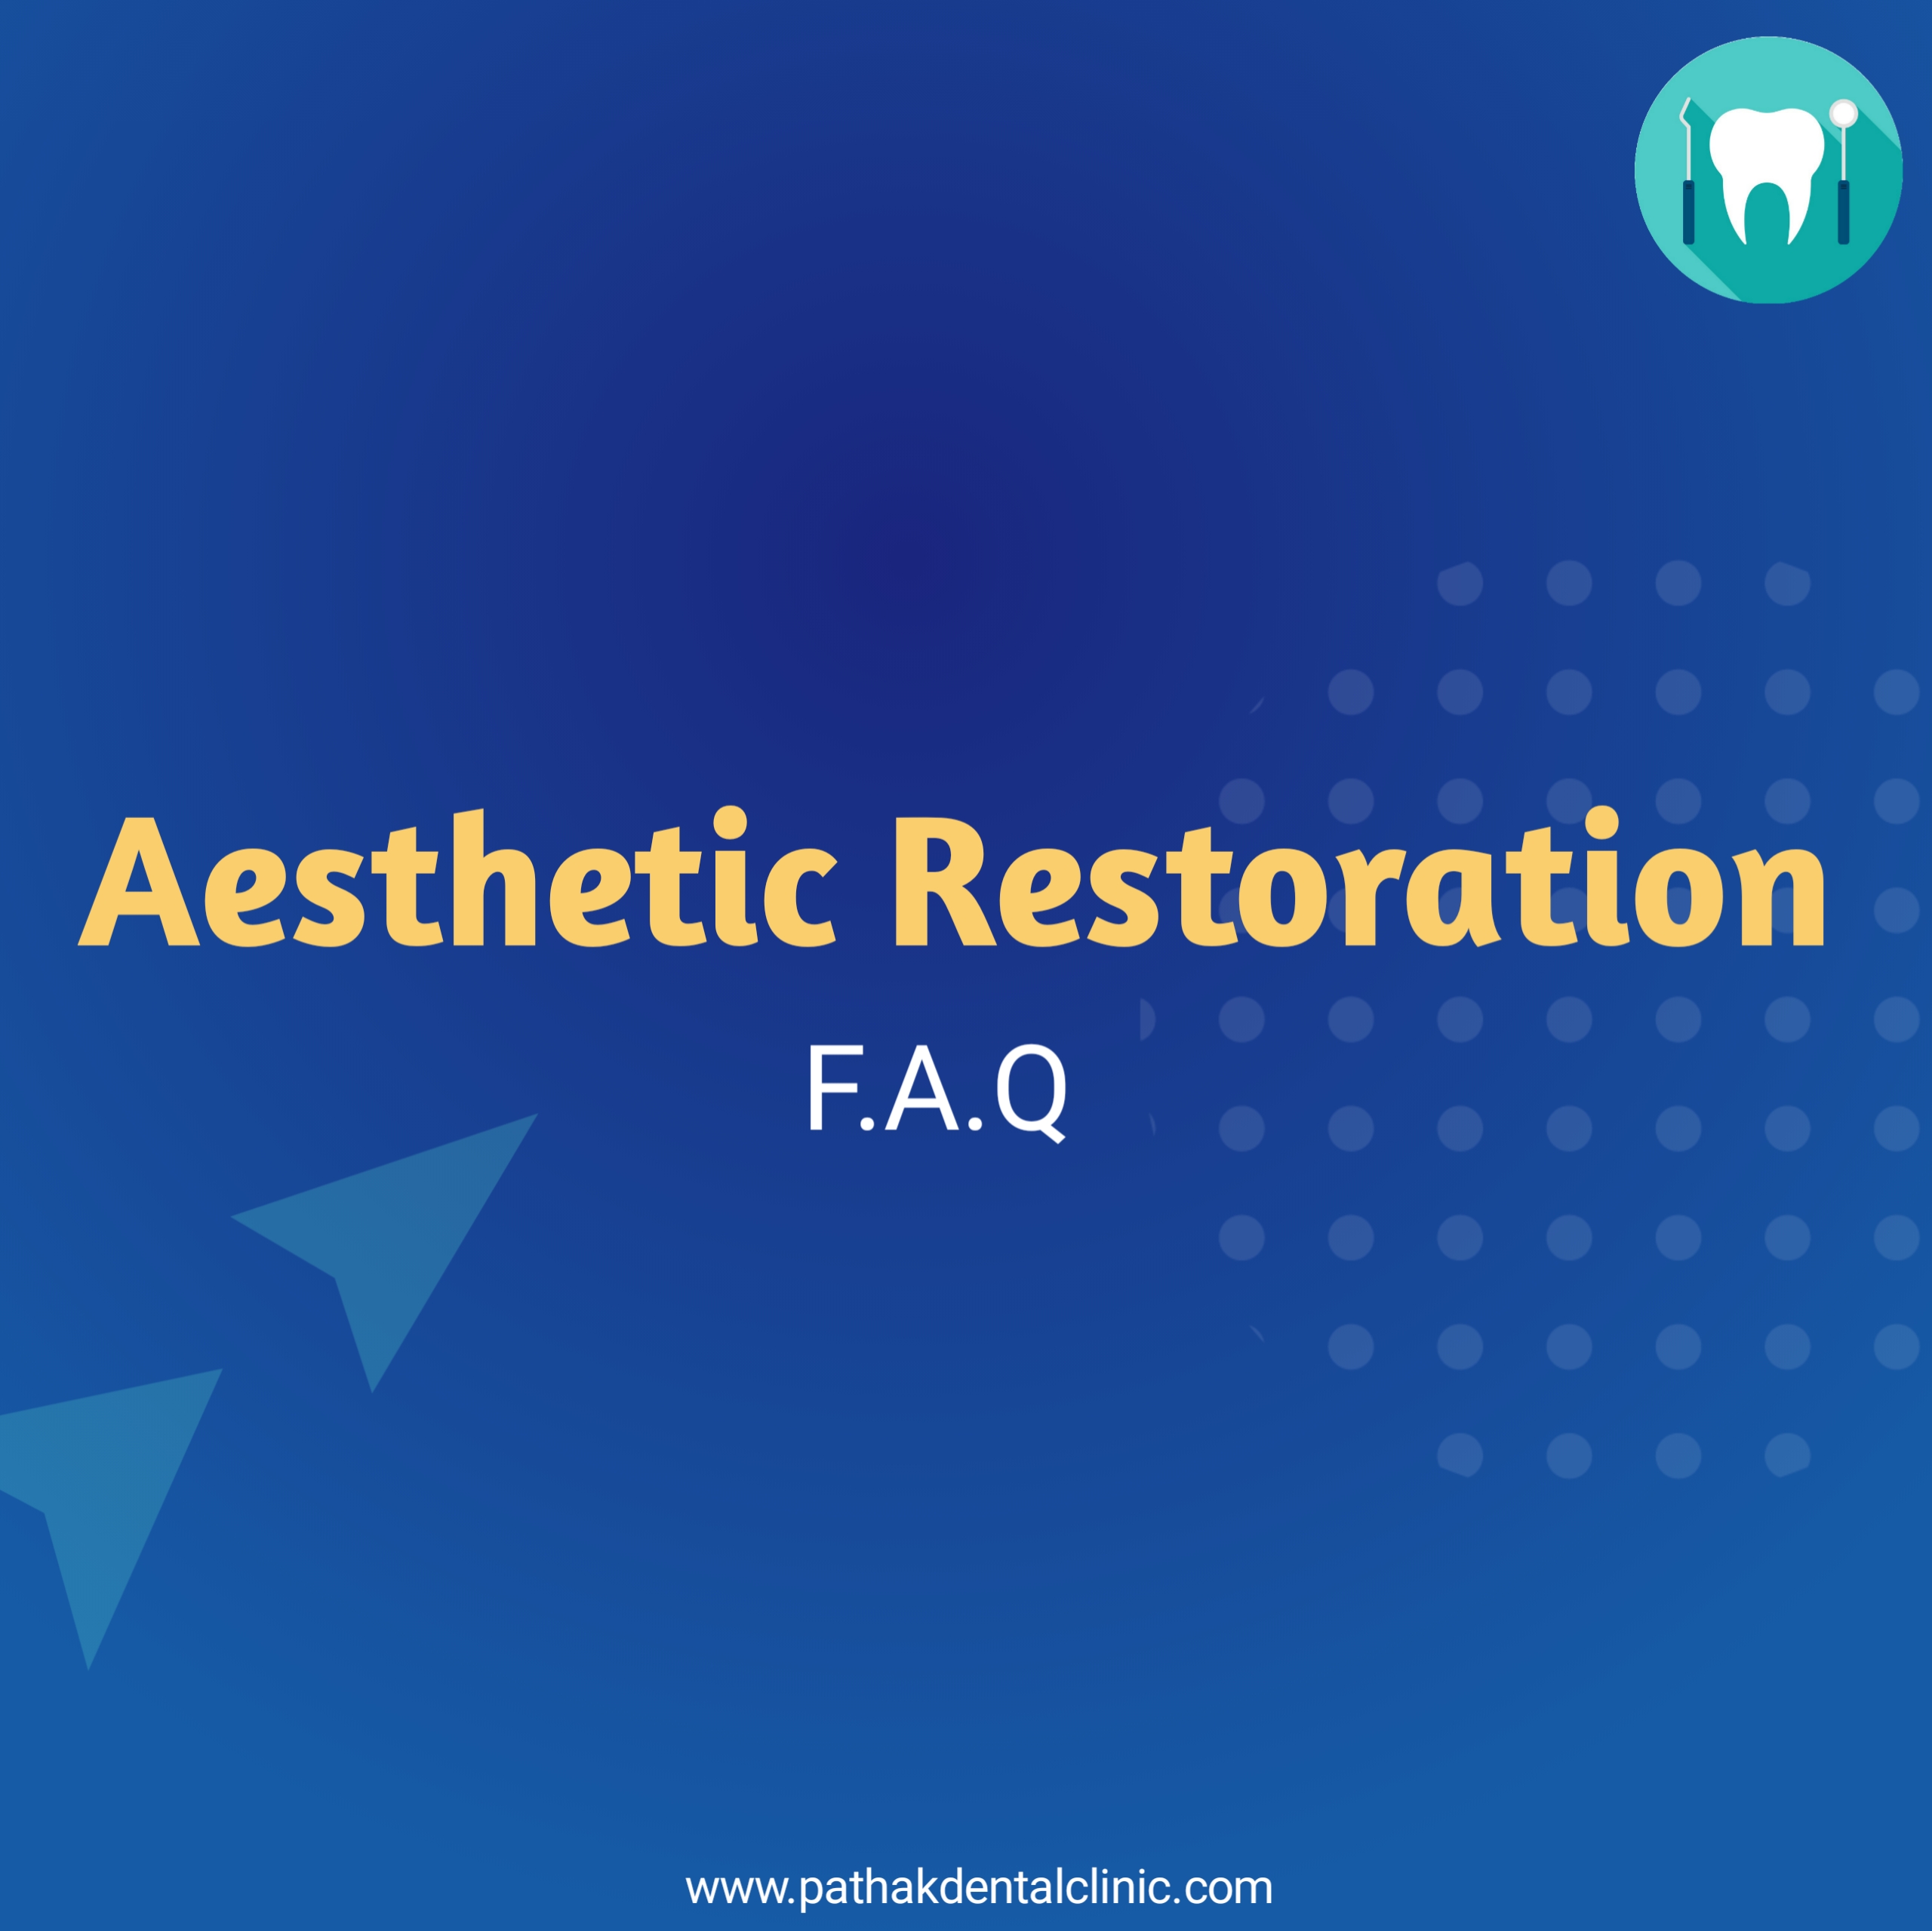 frequently asked questions About Aesthetic restorations